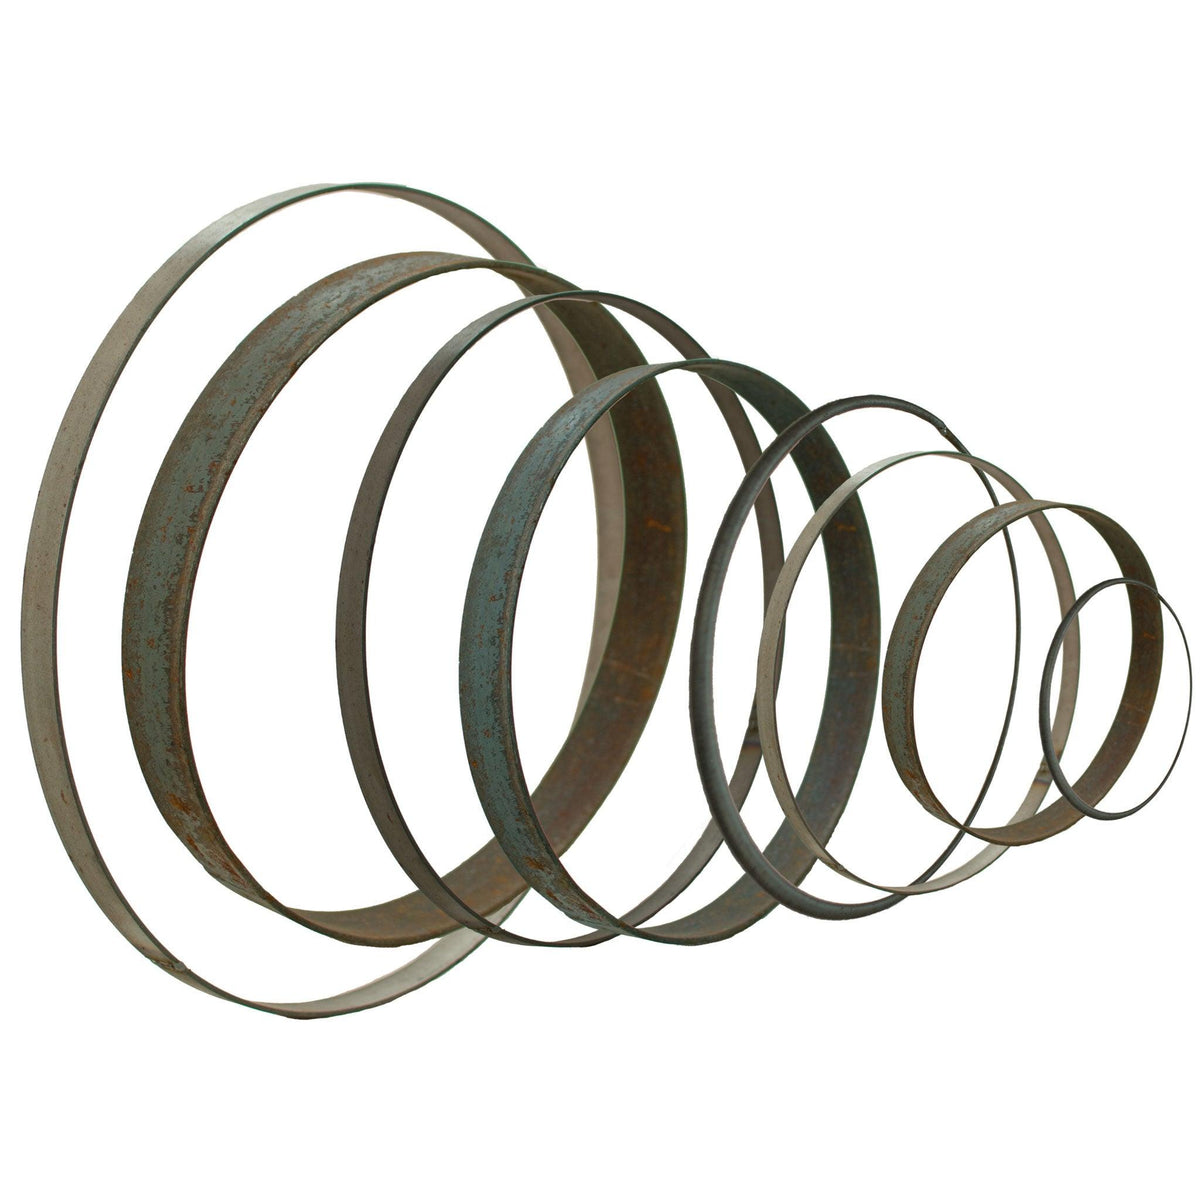 Custom size Steel Rings made by Lee Display    Made by hand in the US.  Lee Display manufactures custom-sized rings in steel.  Hand-rolled into perfect circles and welded together.  Choose over 1,000 different styles, sizes, and dimensions. Shop now at leedisplay.com